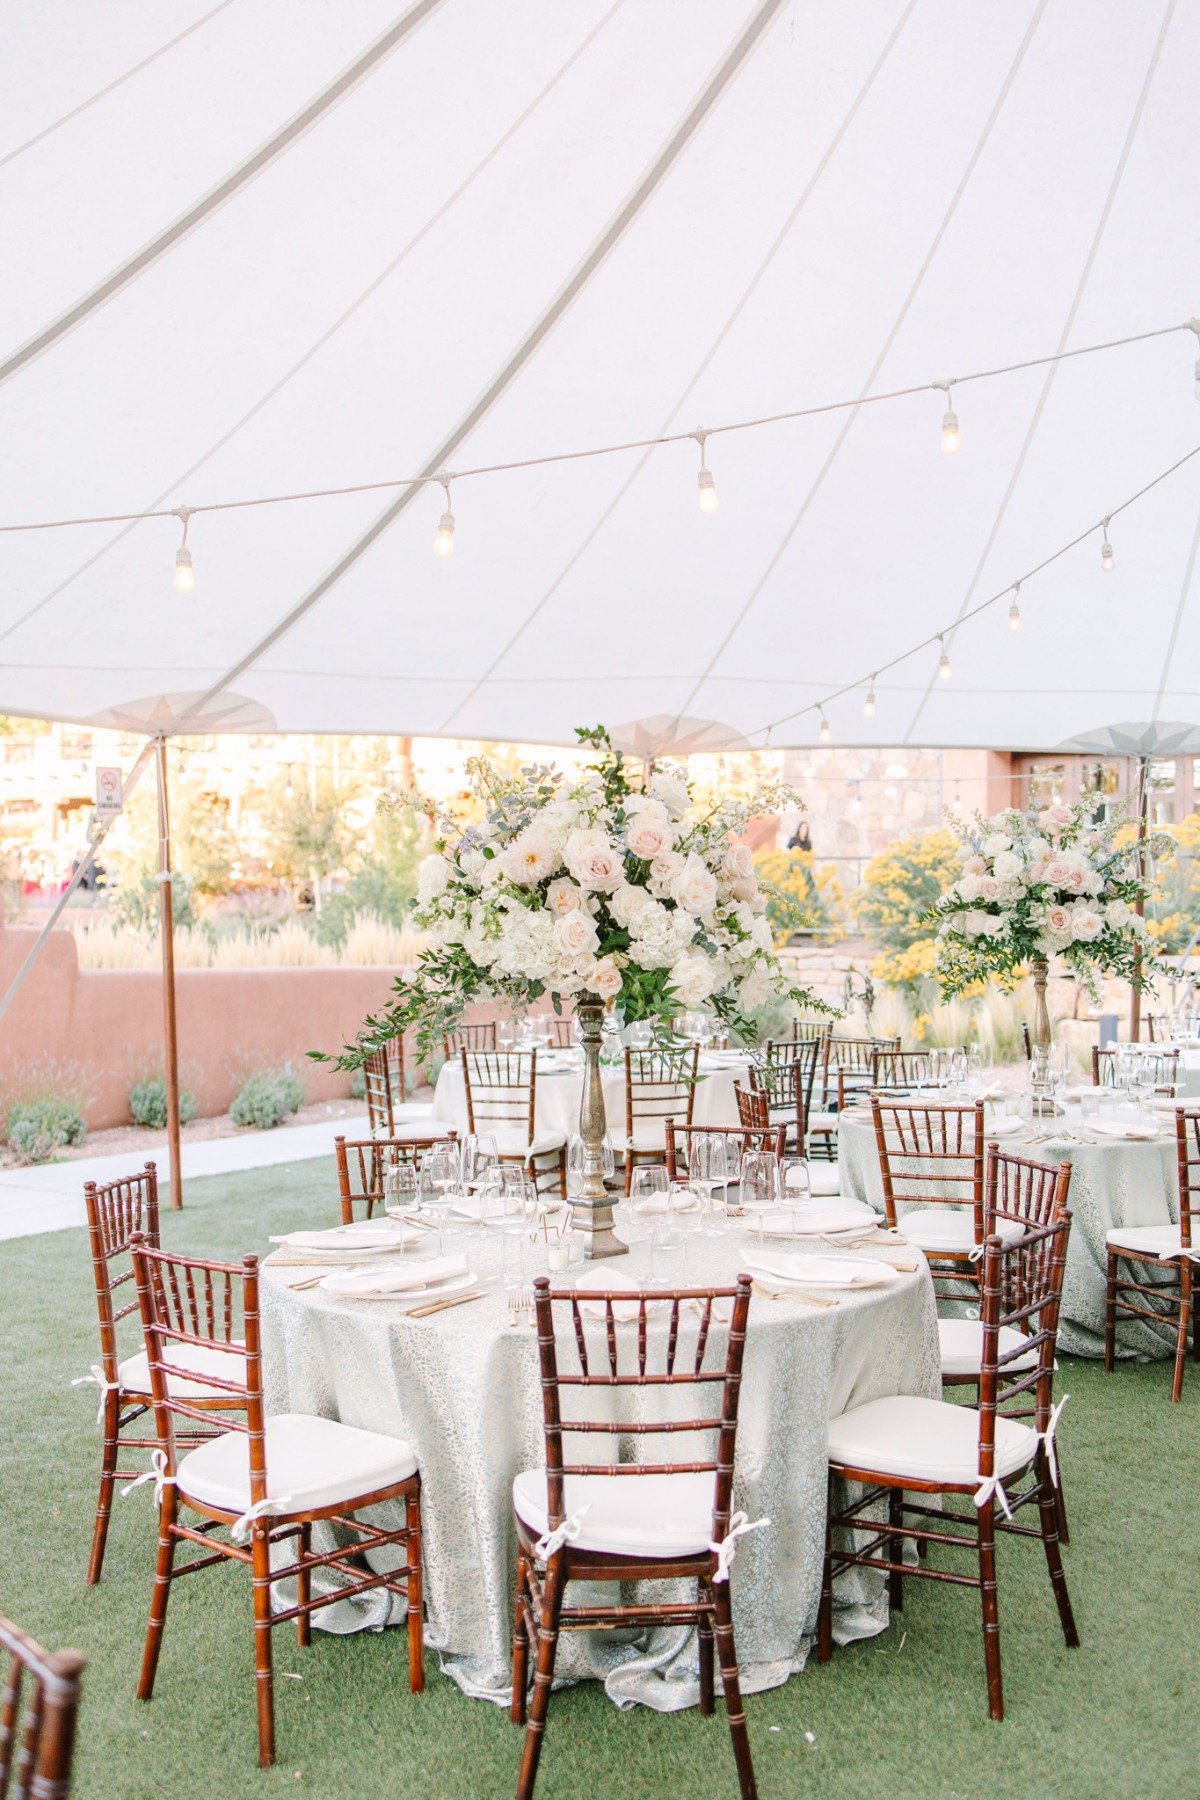 outdoor wedding reception in white and light colors